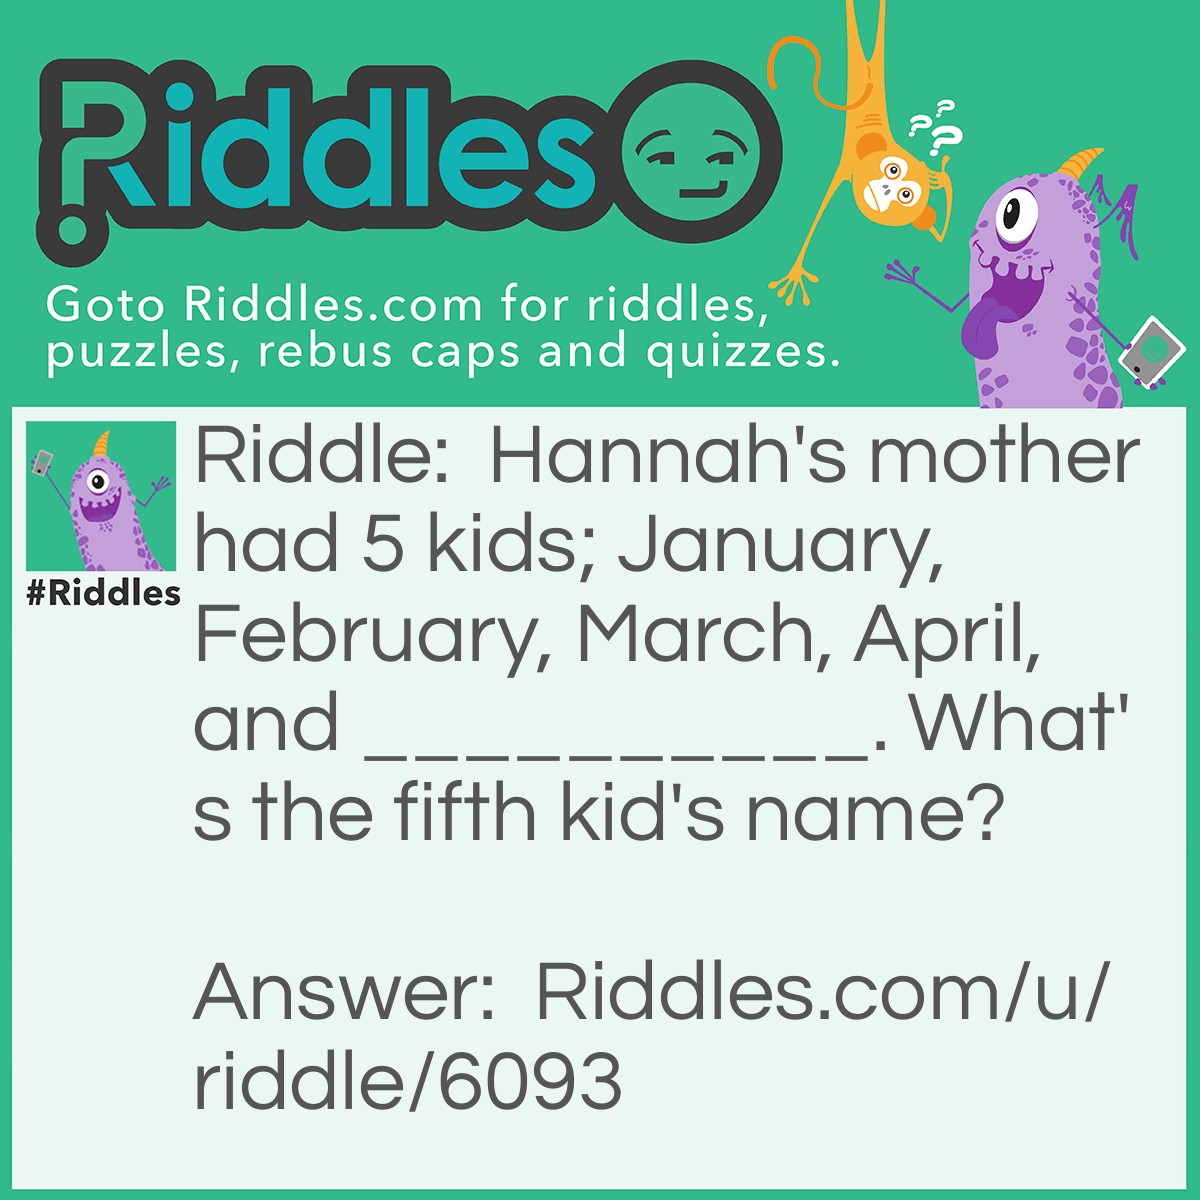 Riddle: Hannah's mother had 5 kids; January, February, March, April, and __________. What's the fifth kid's name? Answer: Hannah.